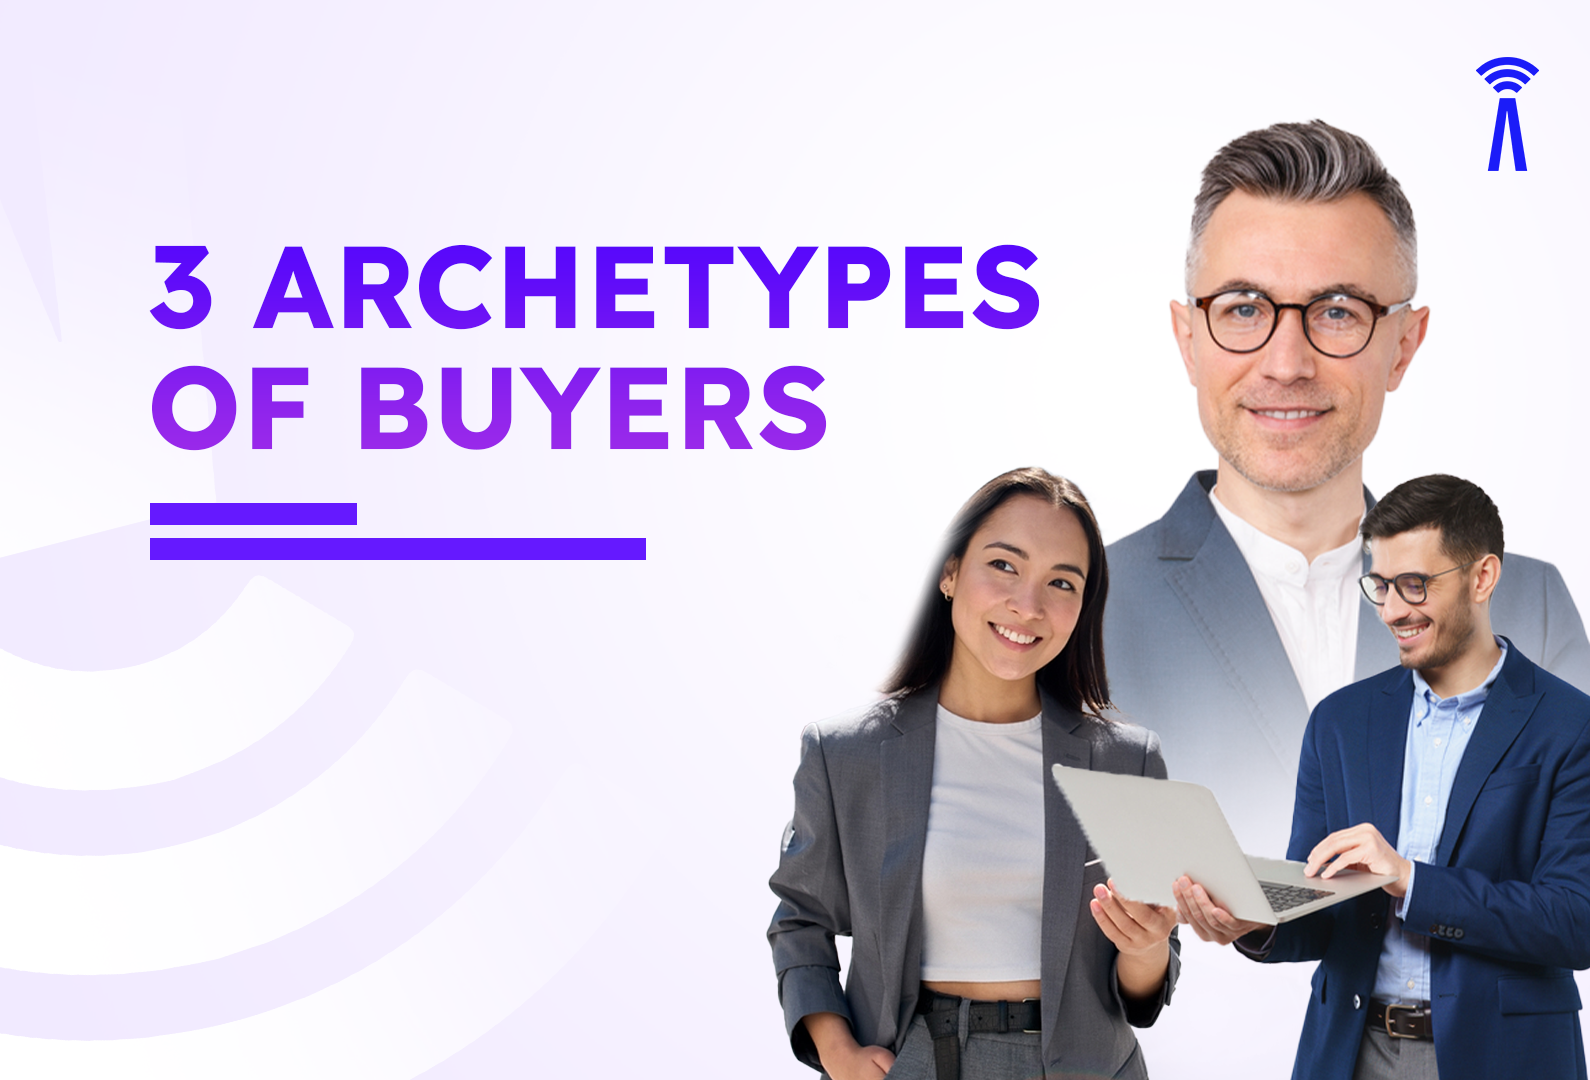 3 Archetypes of buyers you’ll need to adjust your Prospecting for